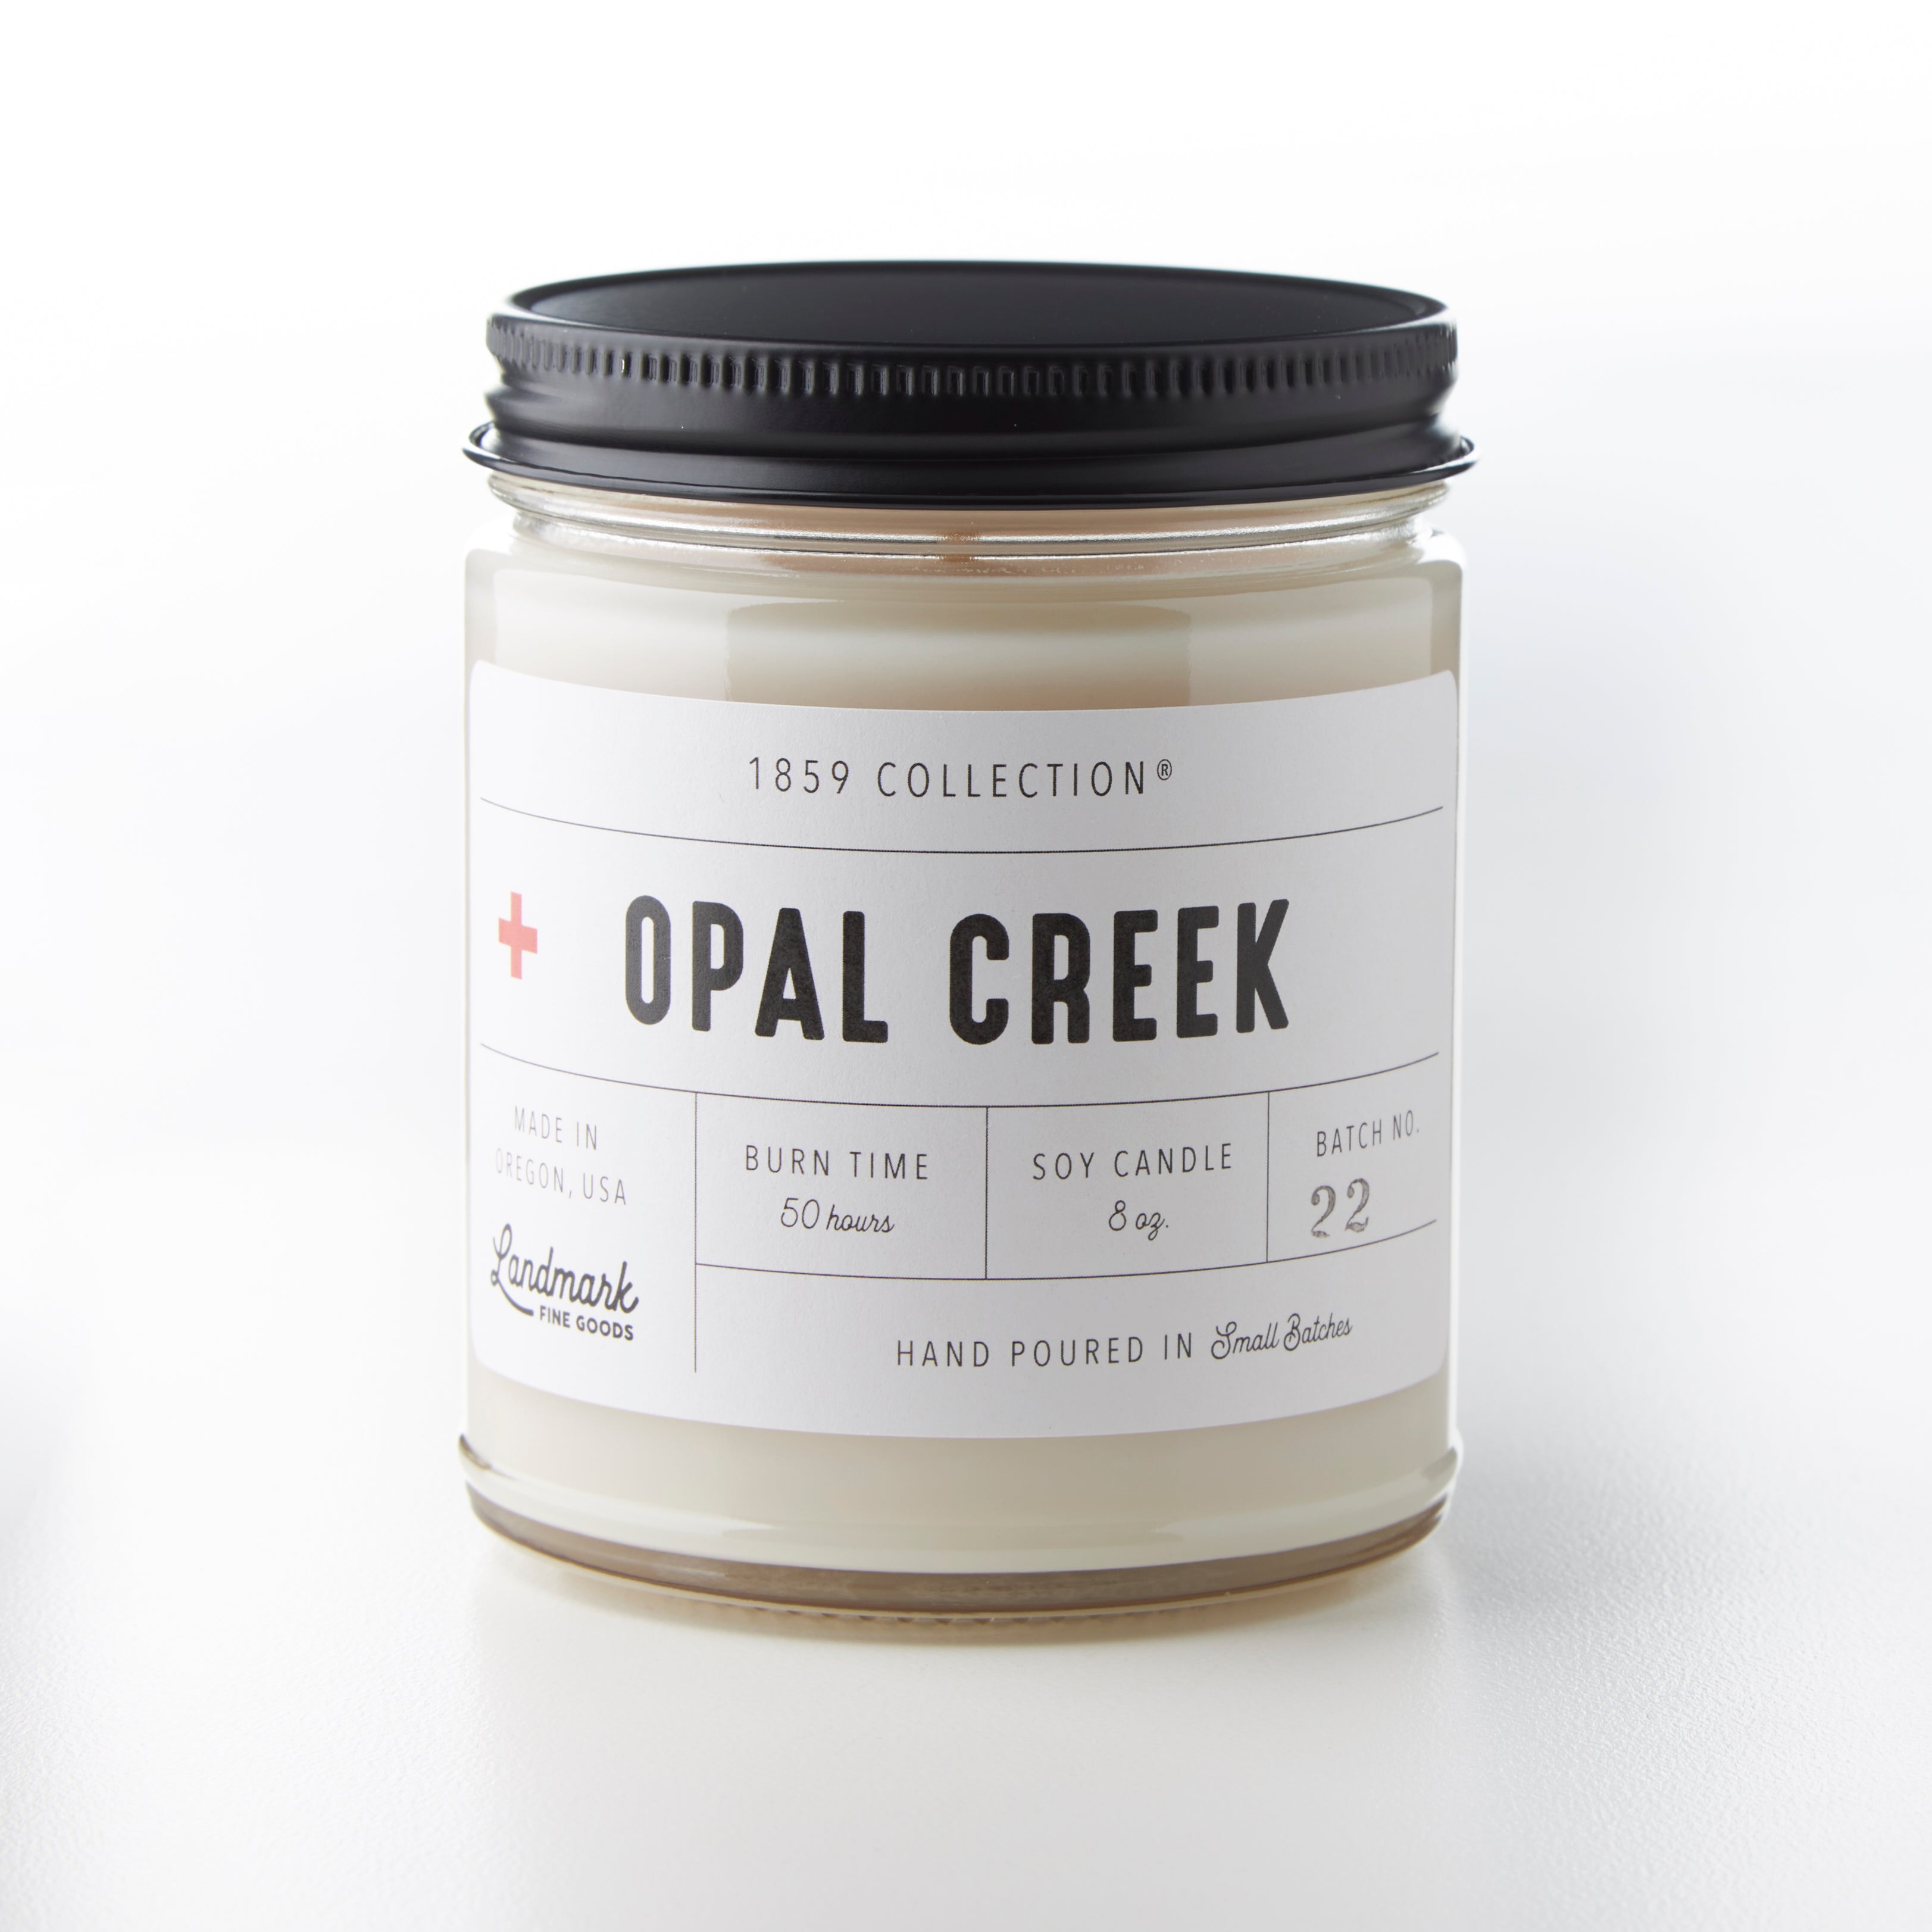 Opal Creek Candle - 1859 Collection®